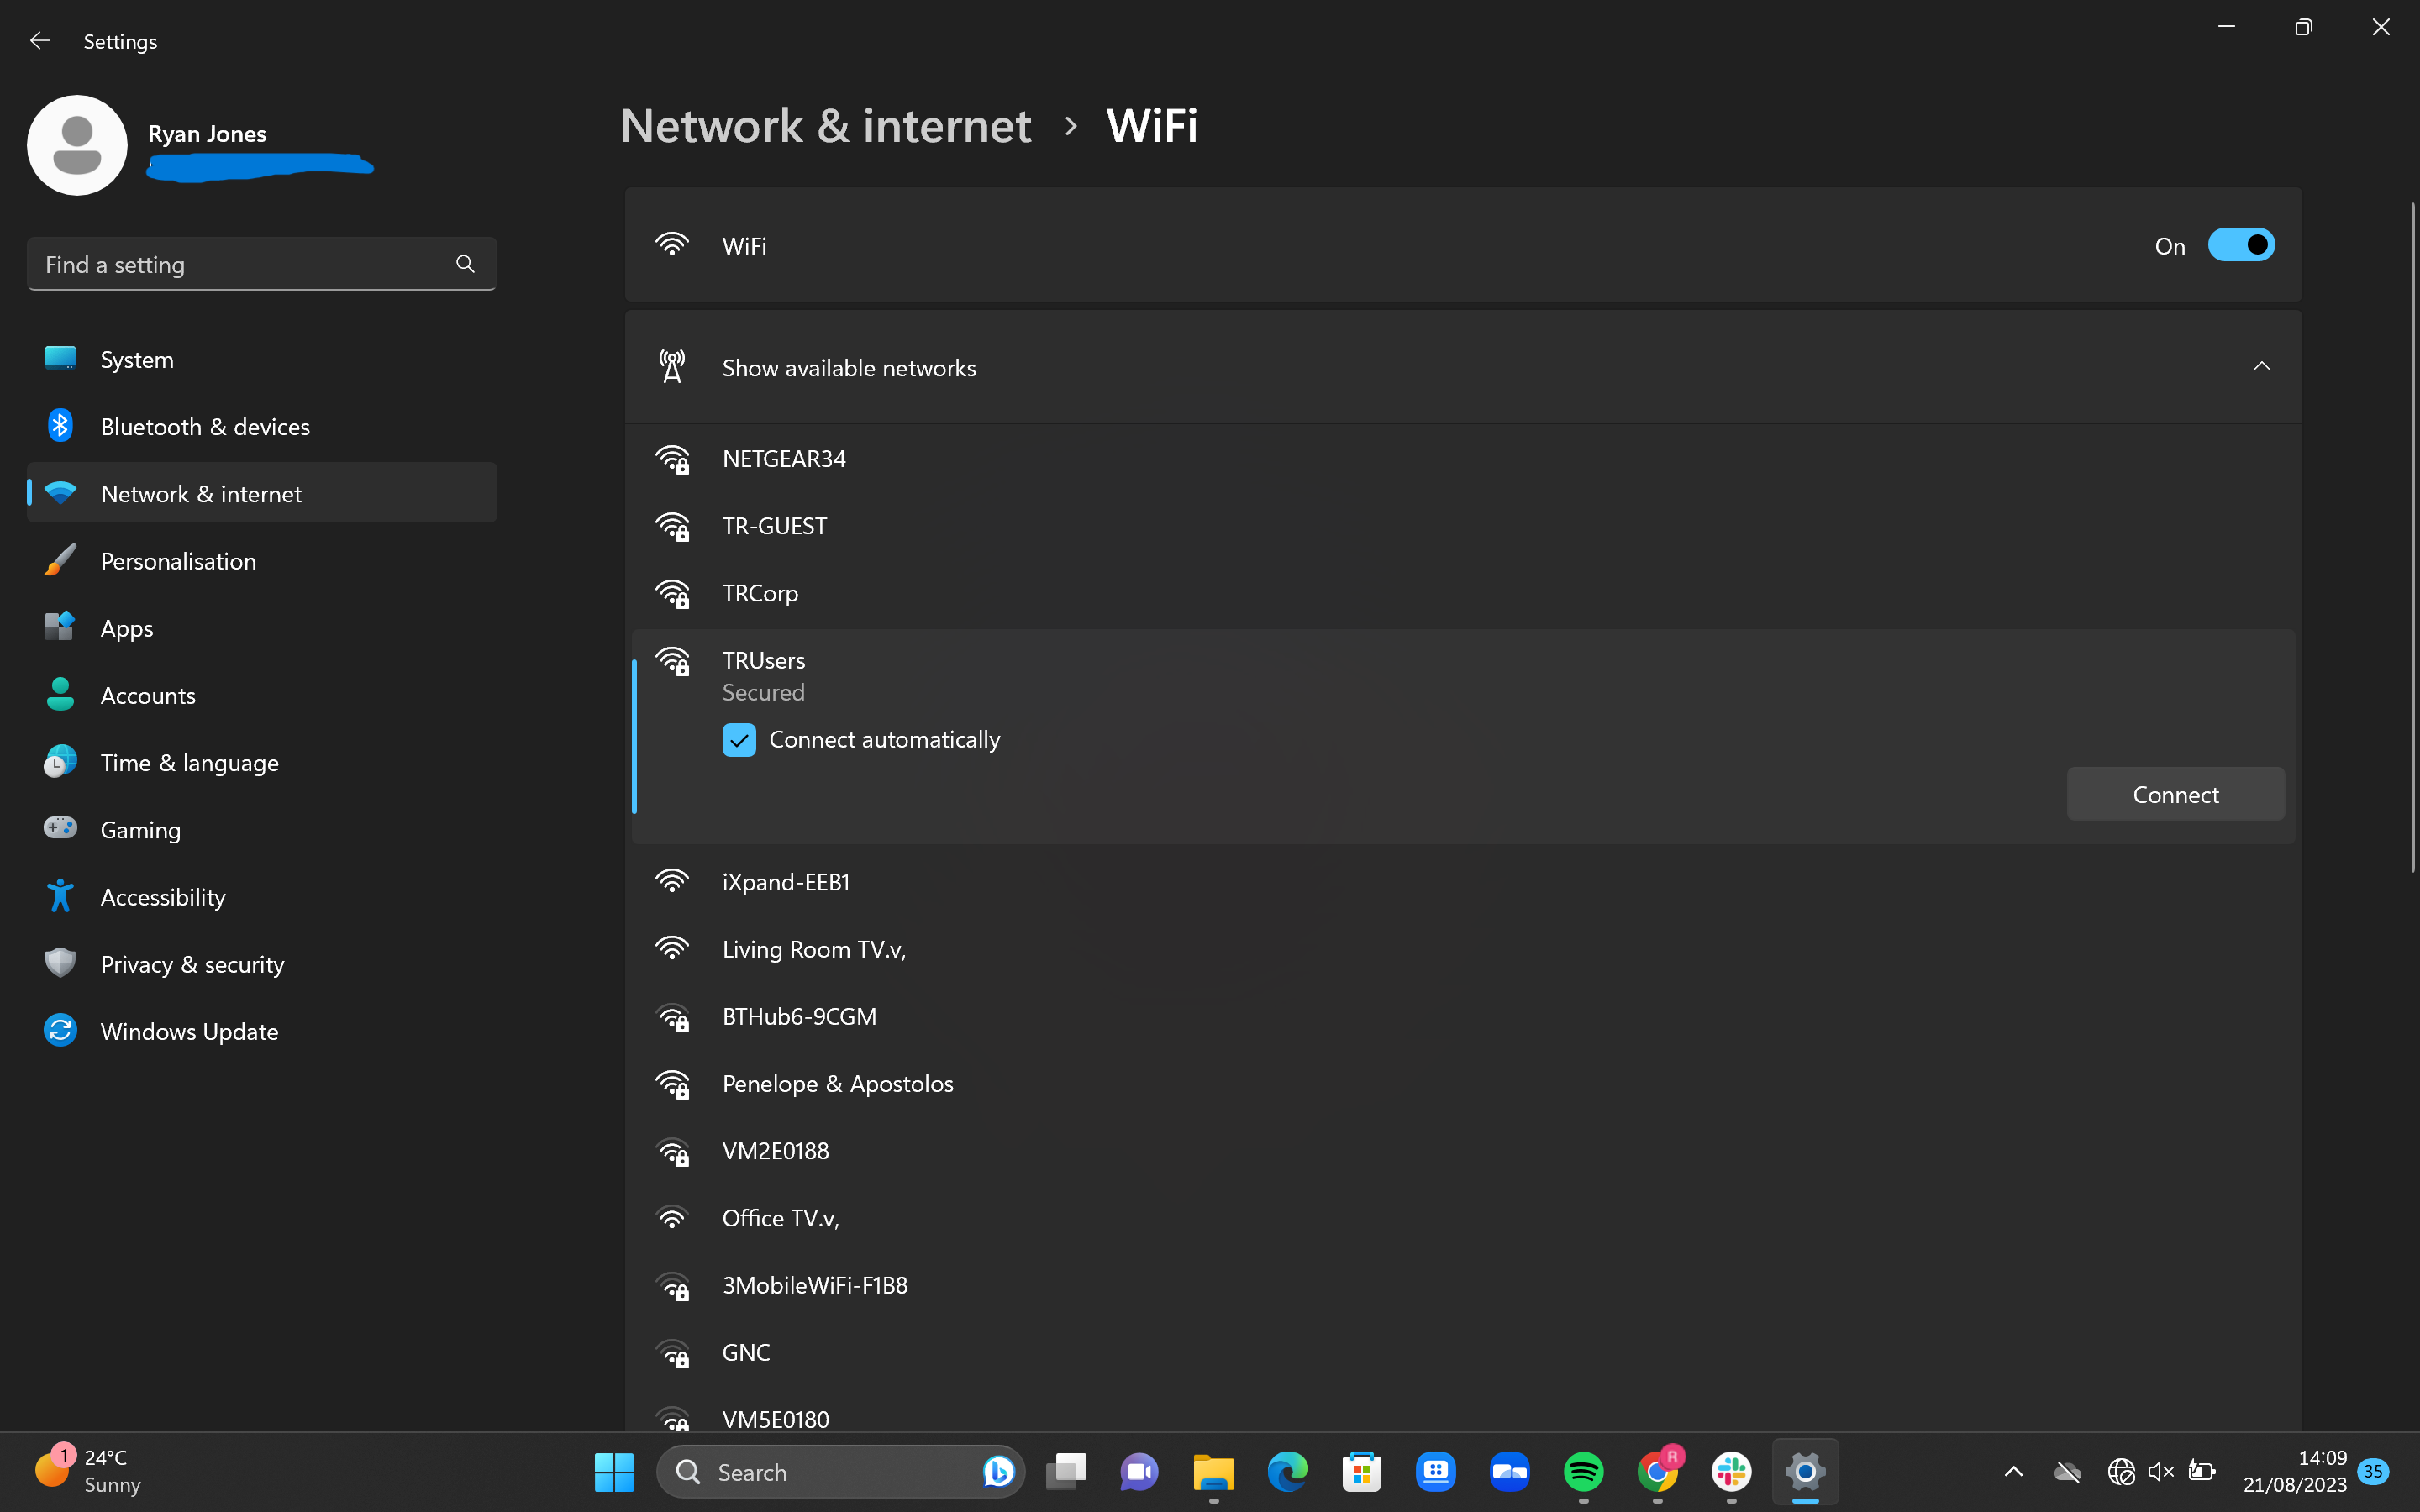 How to connect to WI-Fi on Windows 11